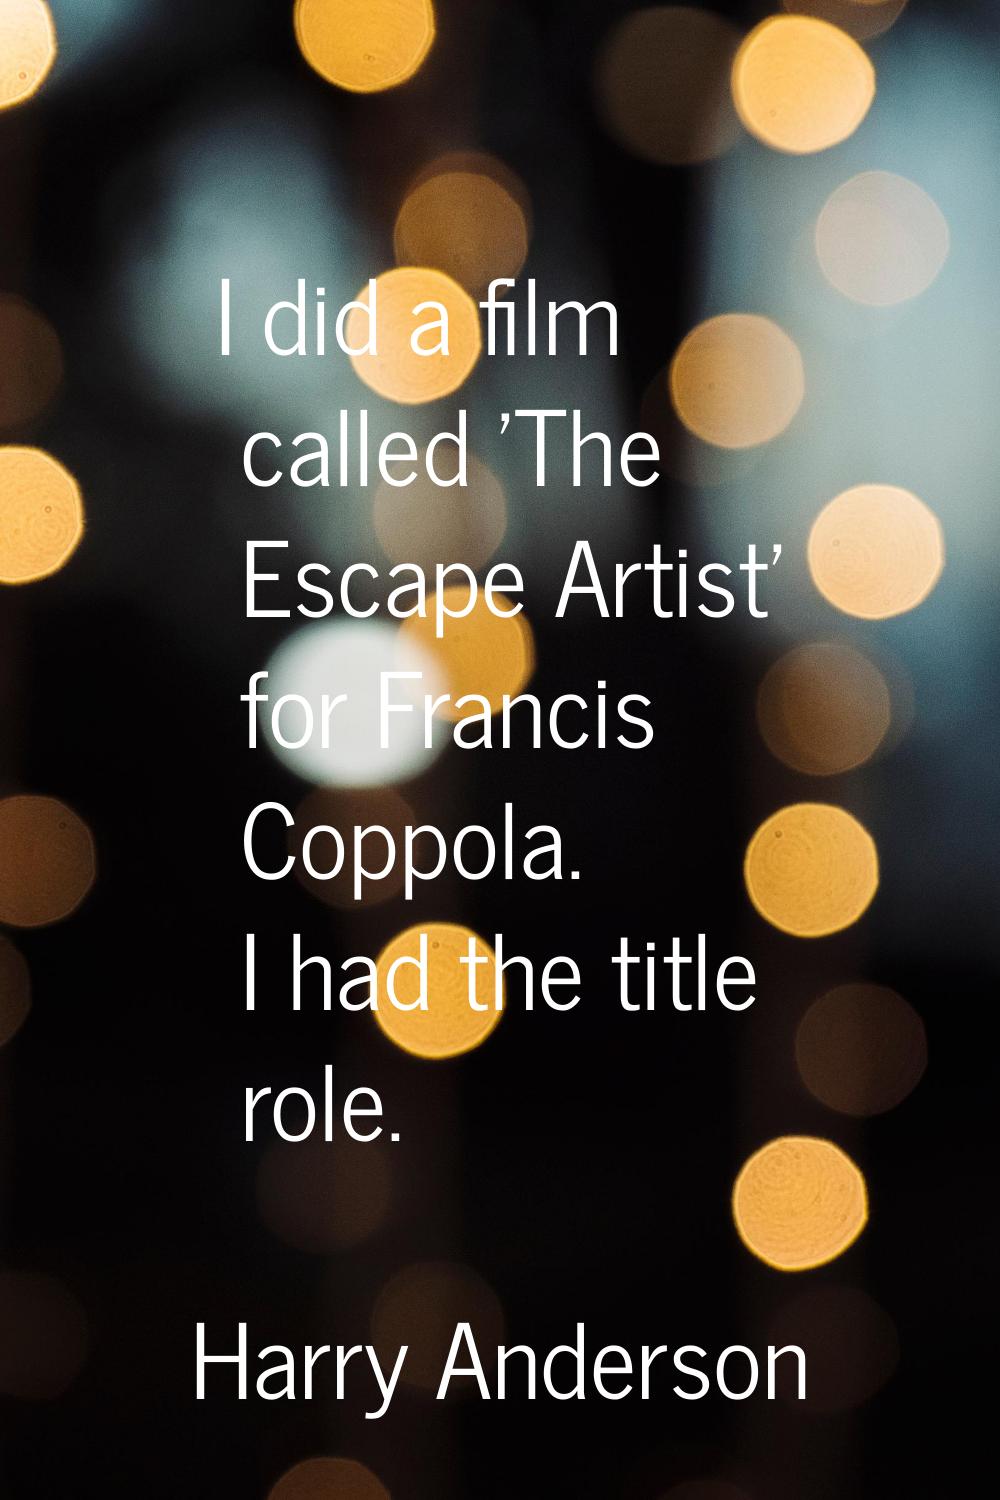 I did a film called 'The Escape Artist' for Francis Coppola. I had the title role.